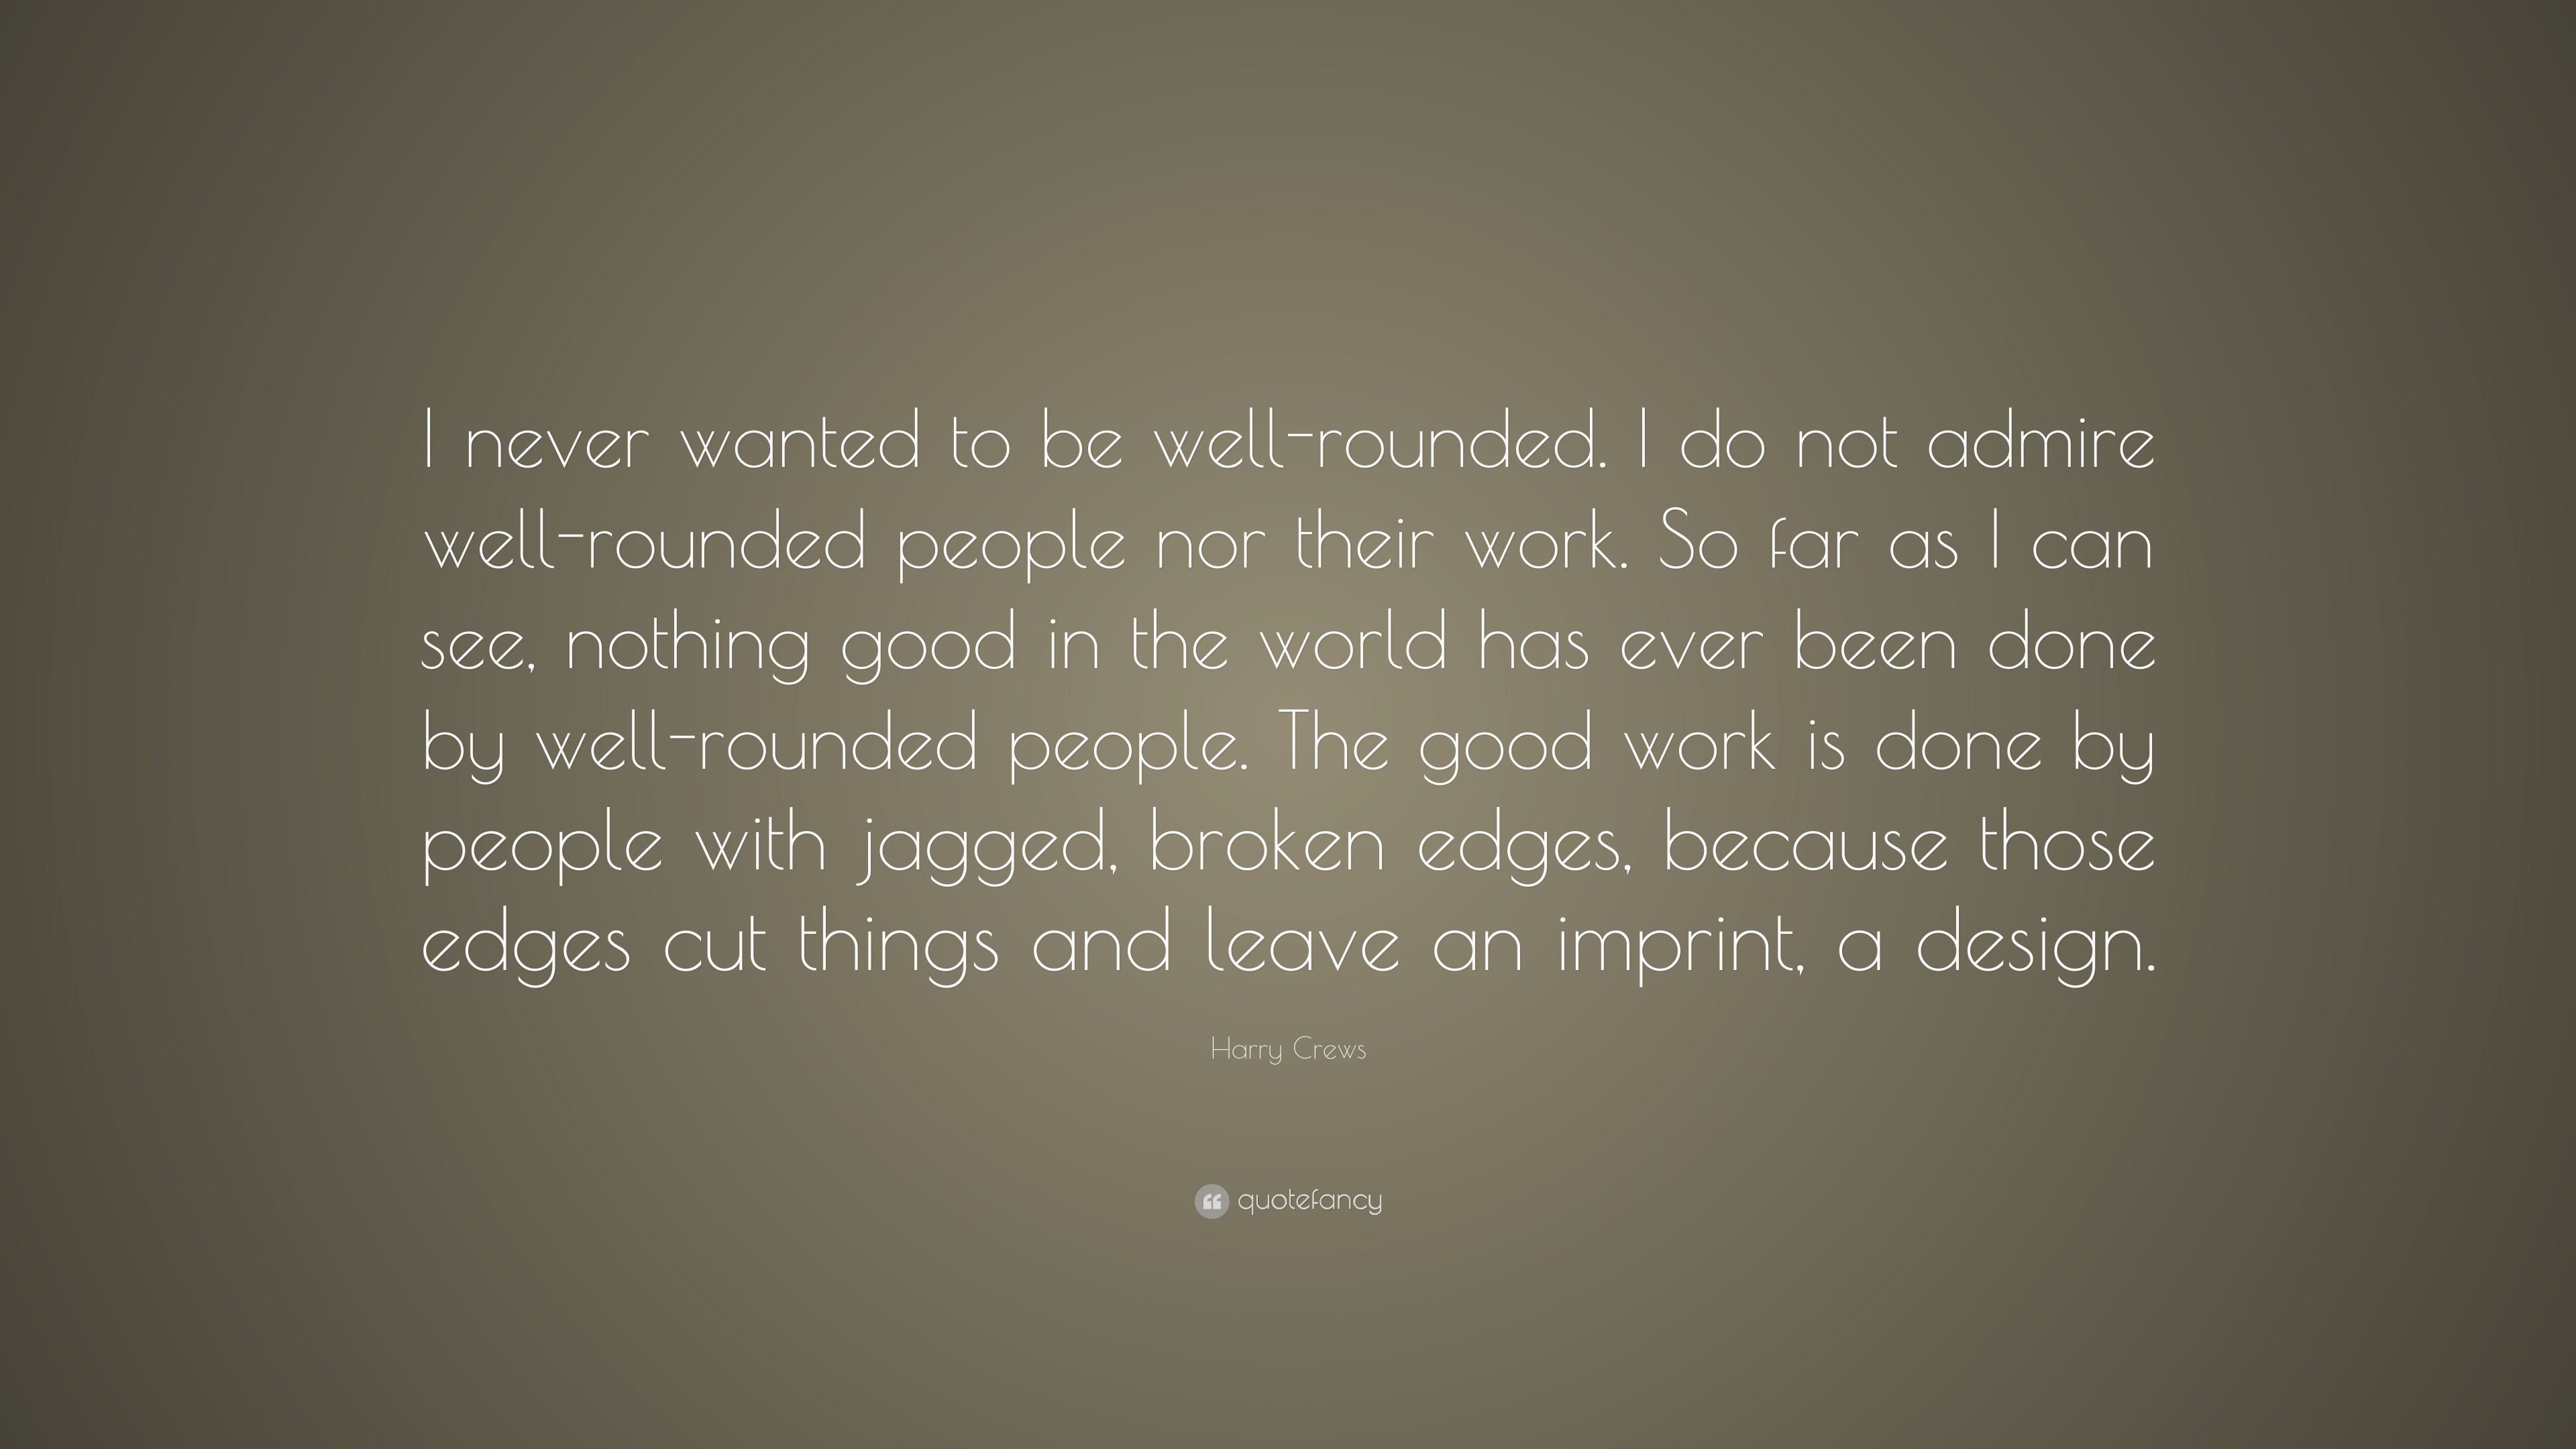 Harry Crews Quote: “I never wanted to be well-rounded. I do not admire ...